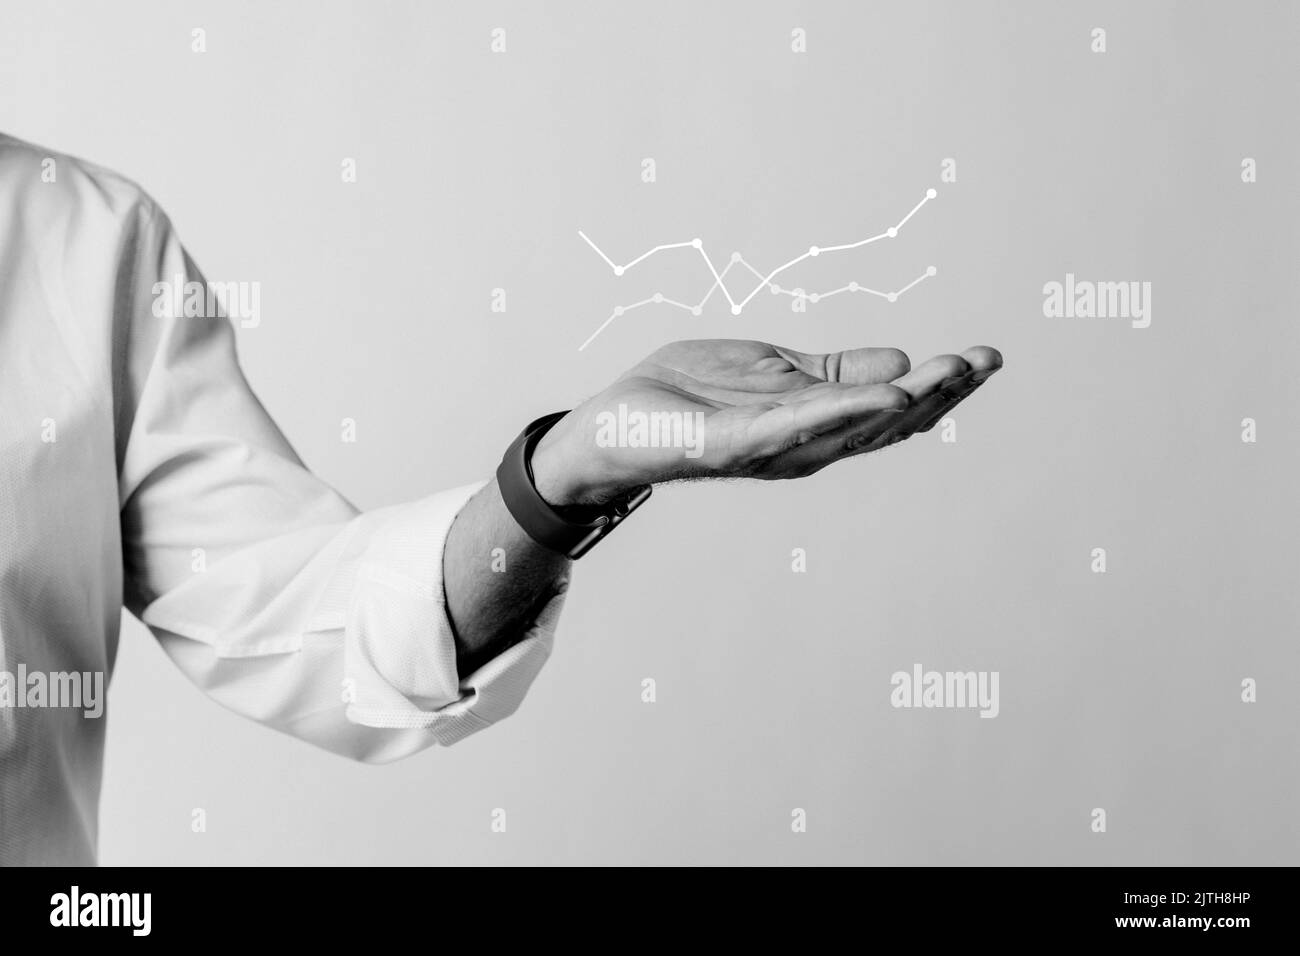 Digital graph with businessman hand overlay Stock Photo